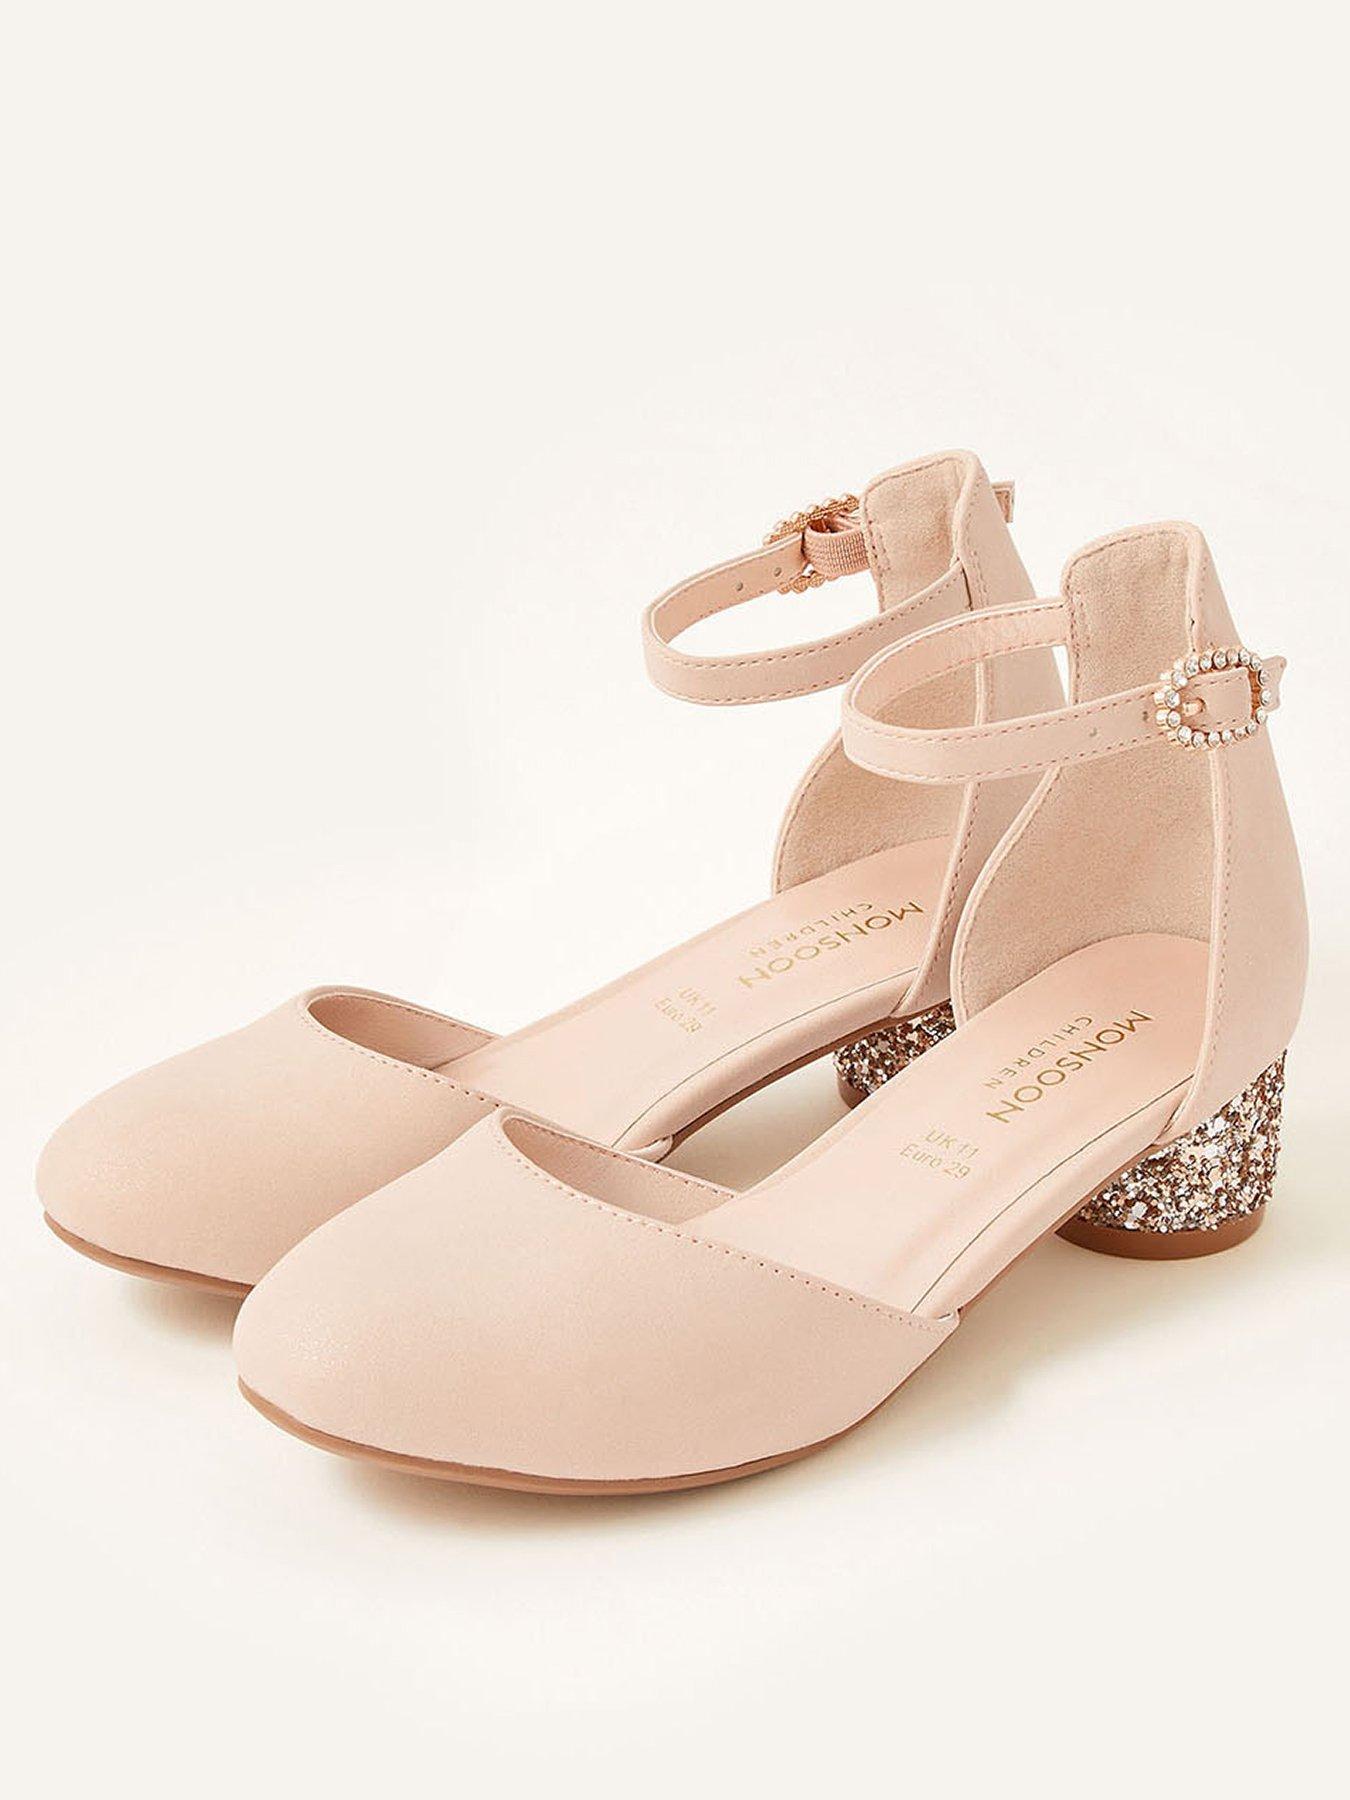 Shoes & boots Girls Shimmer 2 Part Heel Shoes - Pale Pink